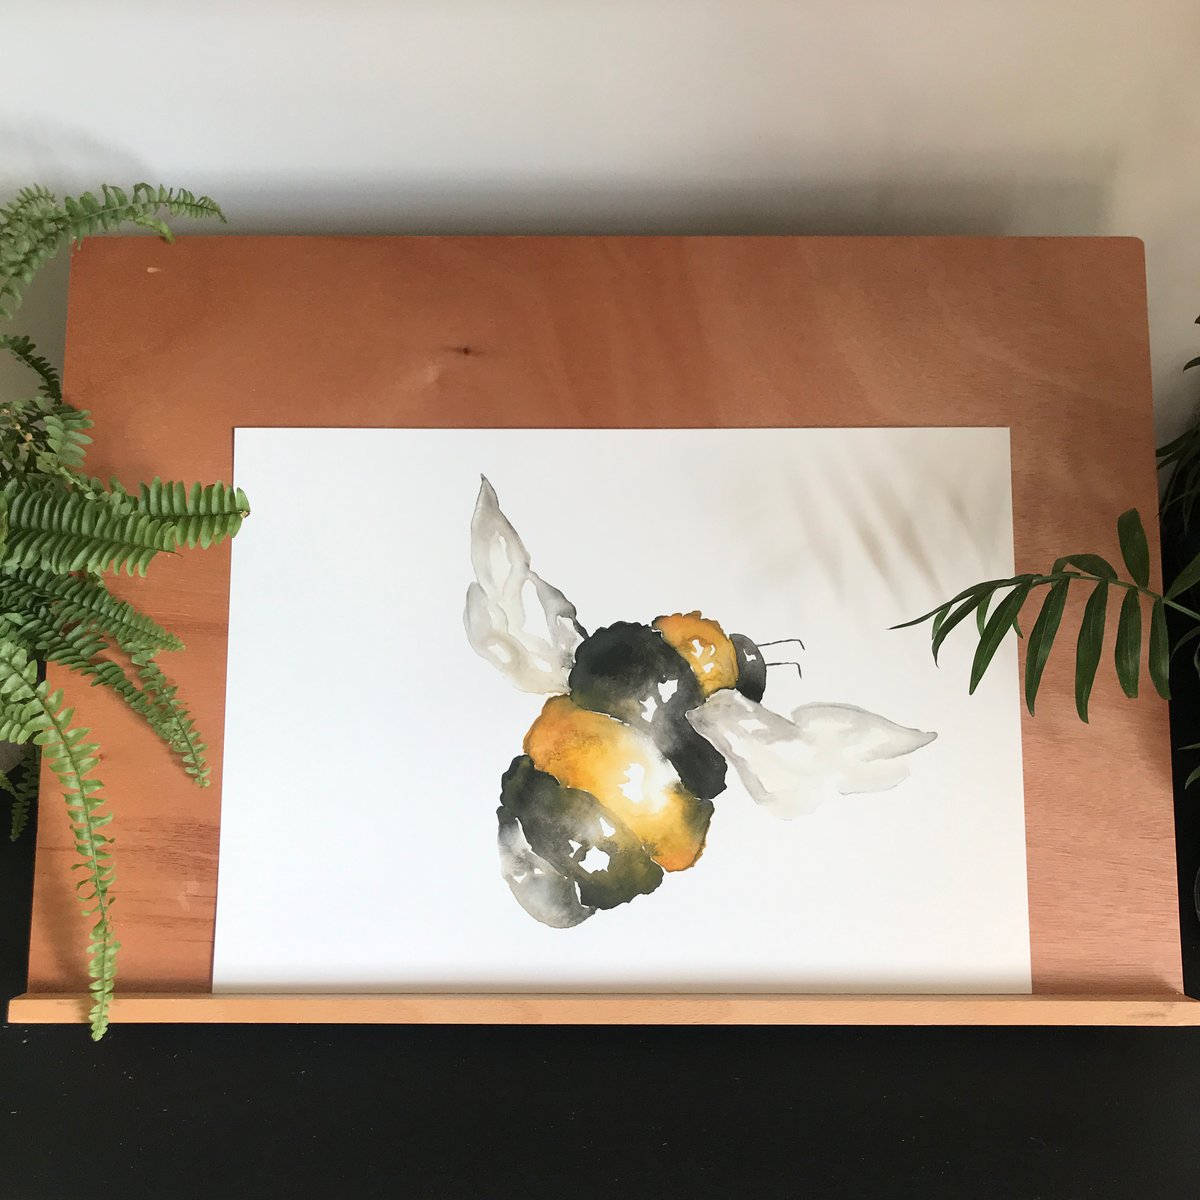 Personalized Bee & Willow Home